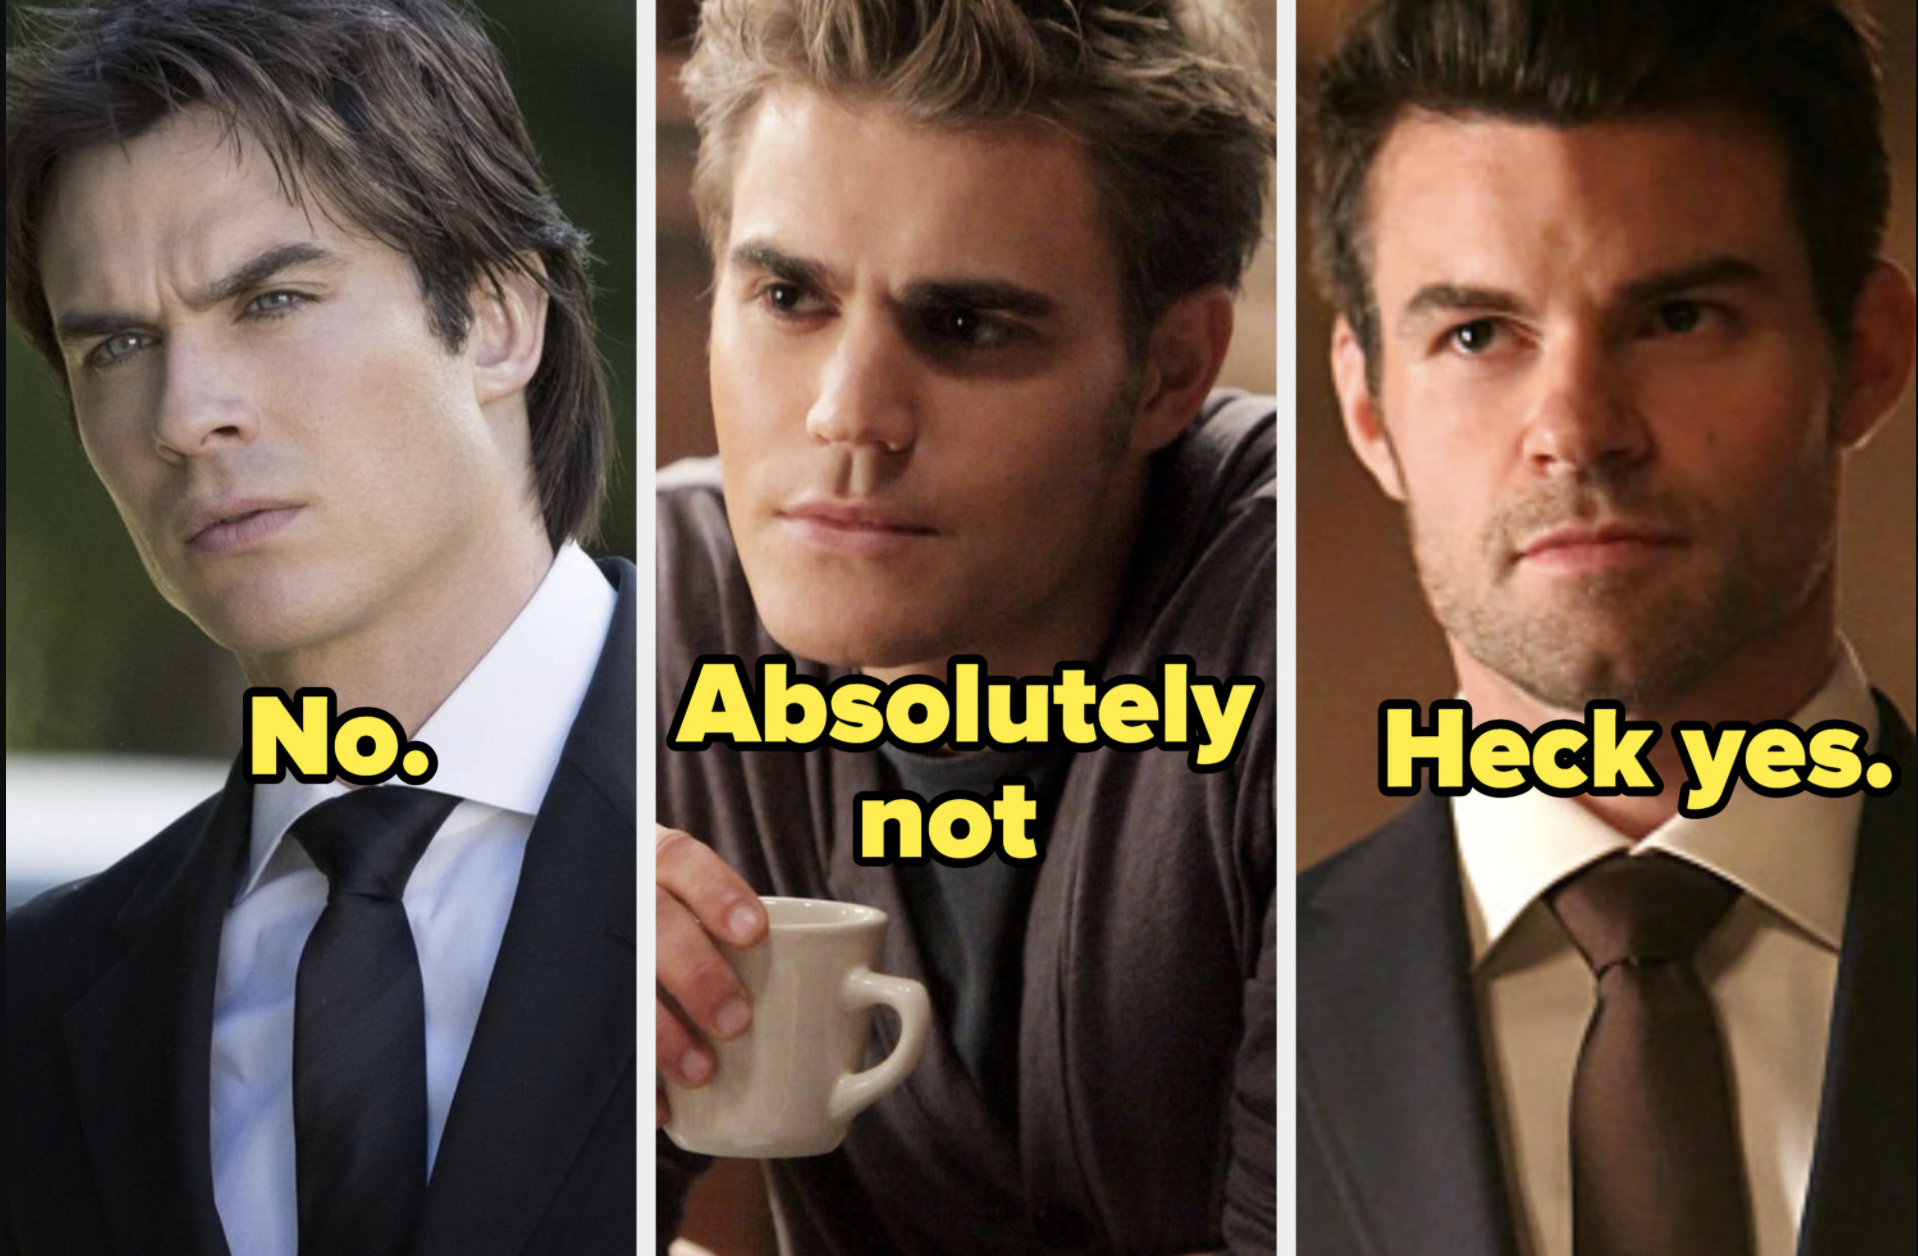 Stefan and Damon have a sister?!?! -Kol Mikaelson Love Story